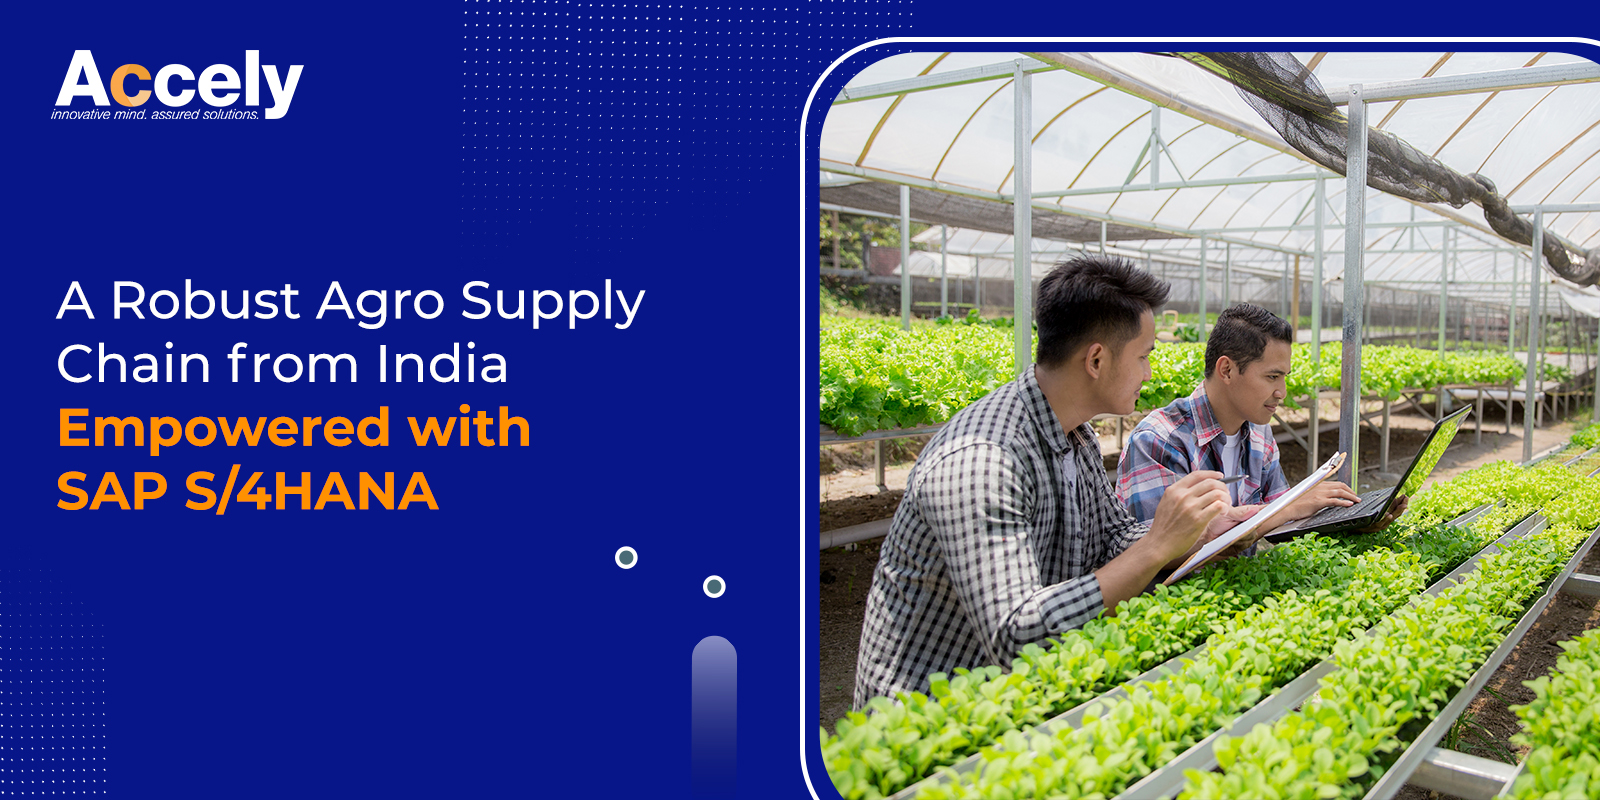 A Robust Agro Supply Chain from India Empowered with SAP S/4HANA